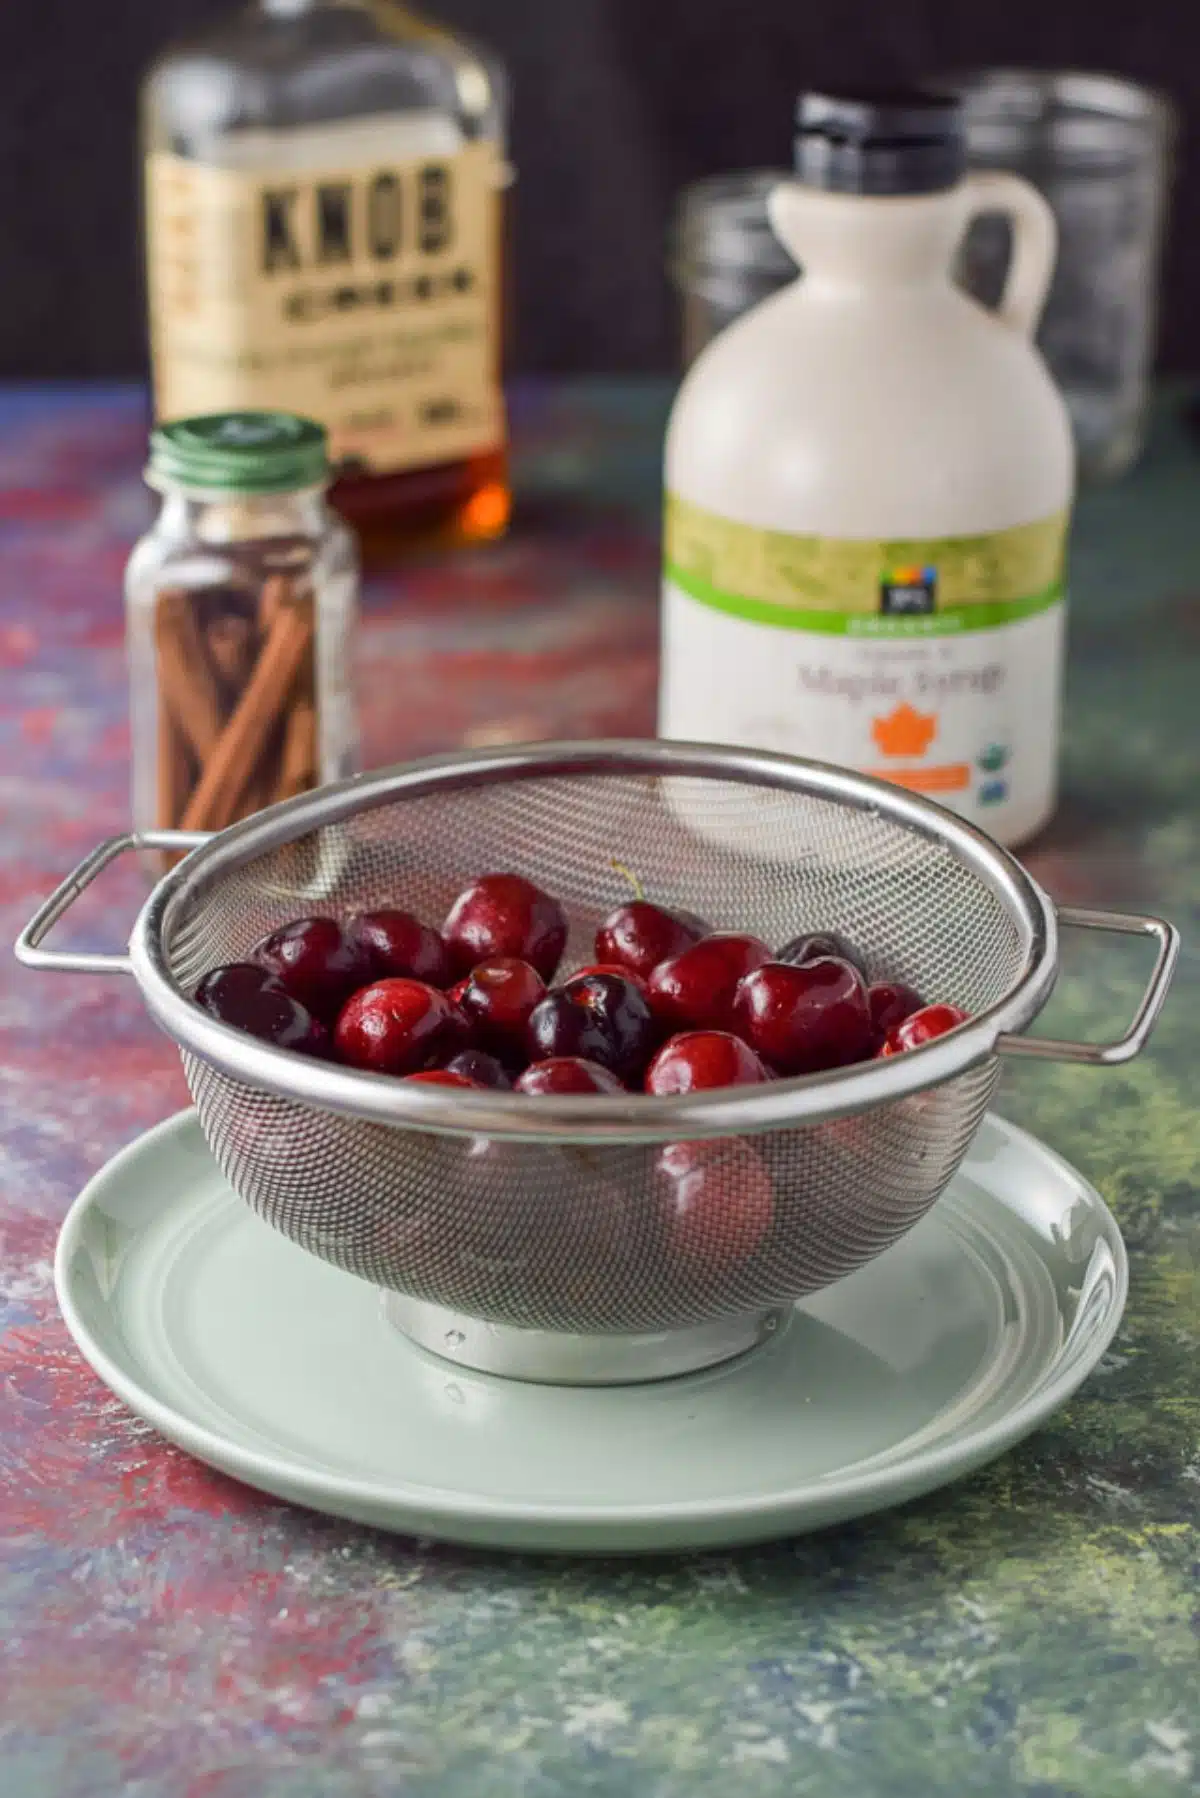 Cherries, cinnamon sticks, bourbon and maple syrup on a colorful table